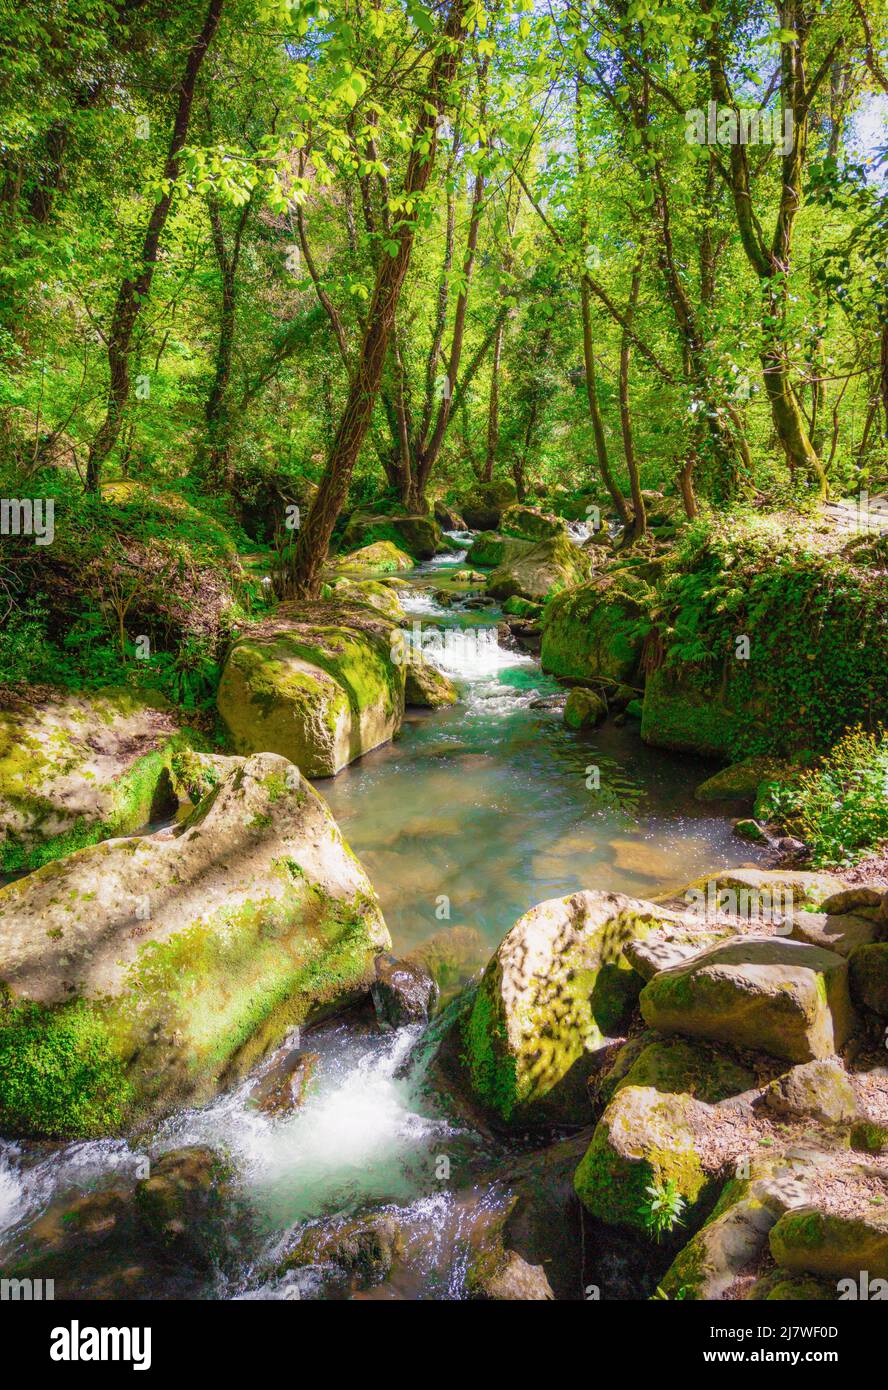 Mazzano Romano (Rome, Italy) - Waterfalls of Monte Gelato in the Regional park of Valle del Treja, province of Rome, with suggestive trekking paths Stock Photo